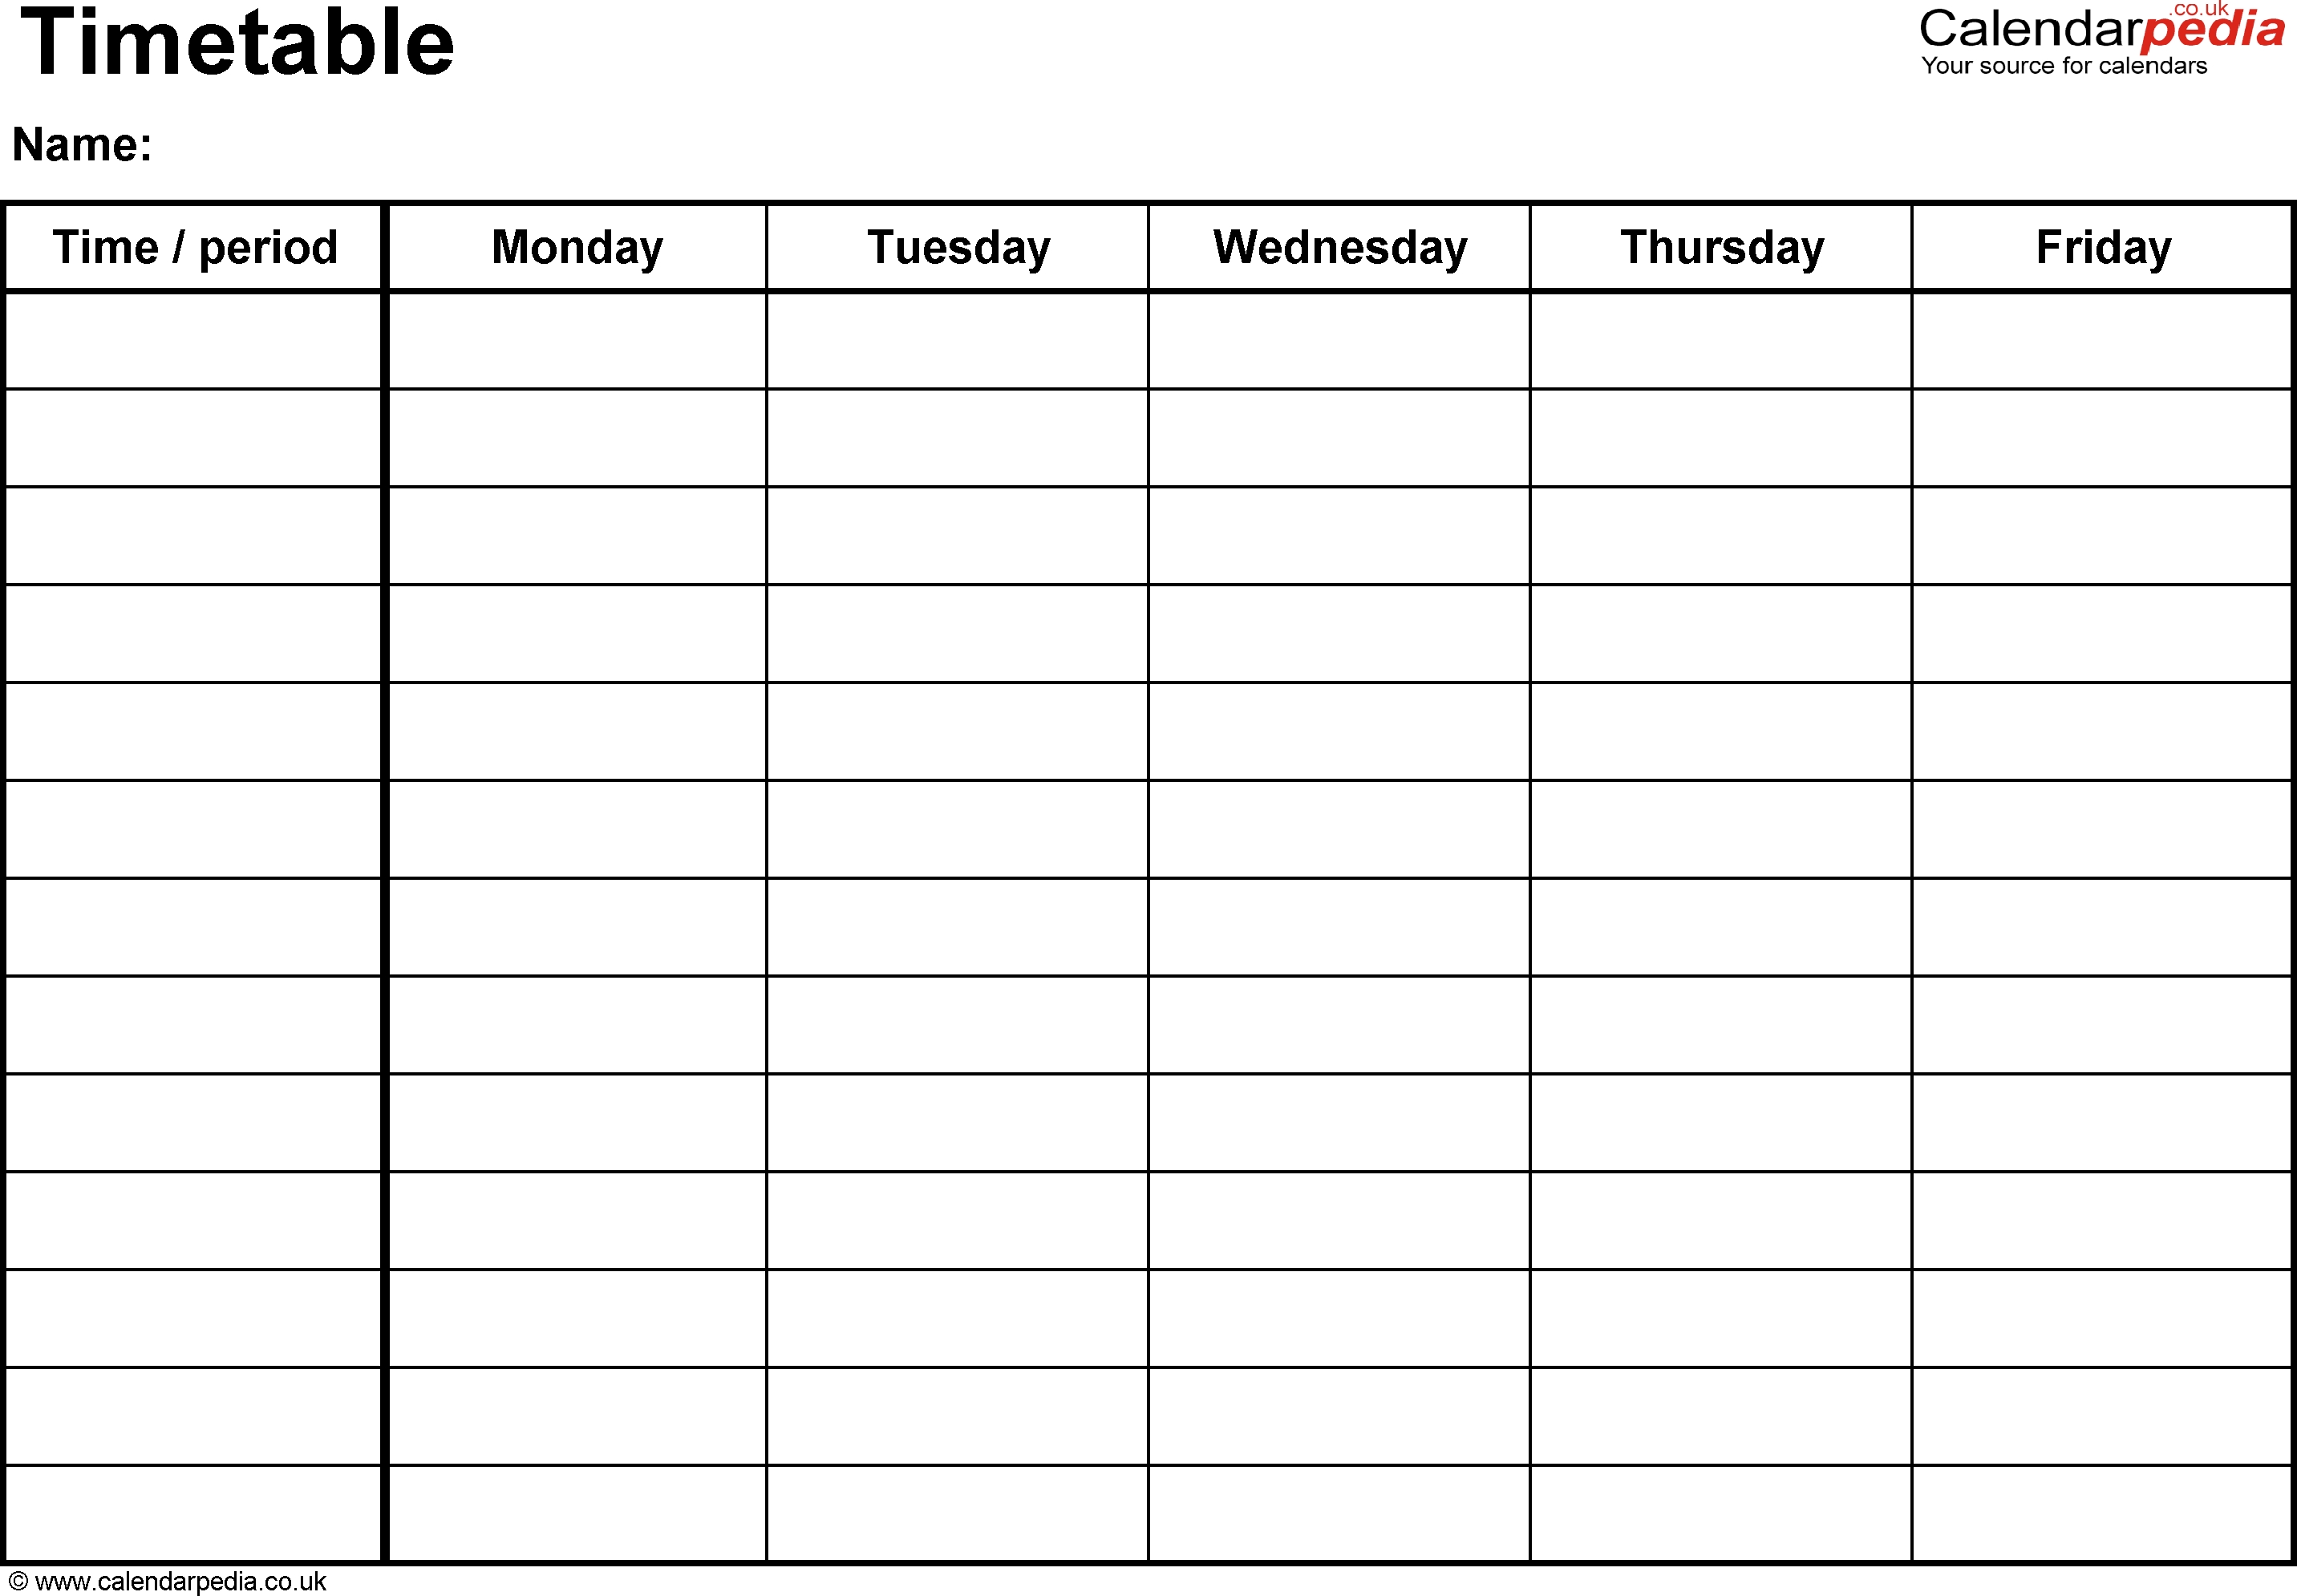 Excel School Schedule Template Timetables As Free Printable with School Calendar Template Monday Thursday